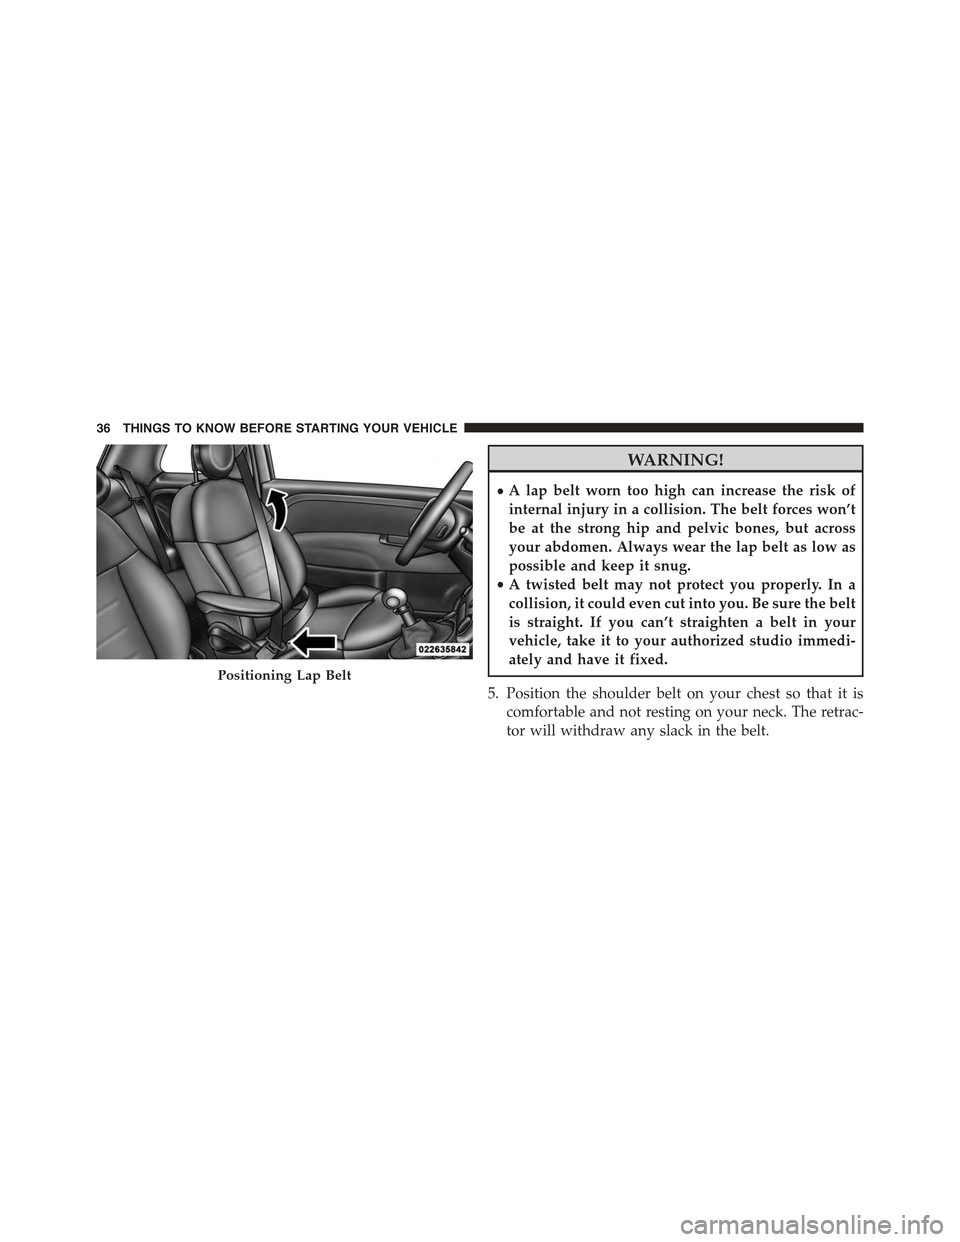 FIAT 500C 2013 2.G Owners Manual WARNING!
•A lap belt worn too high can increase the risk of
internal injury in a collision. The belt forces won’t
be at the strong hip and pelvic bones, but across
your abdomen. Always wear the la